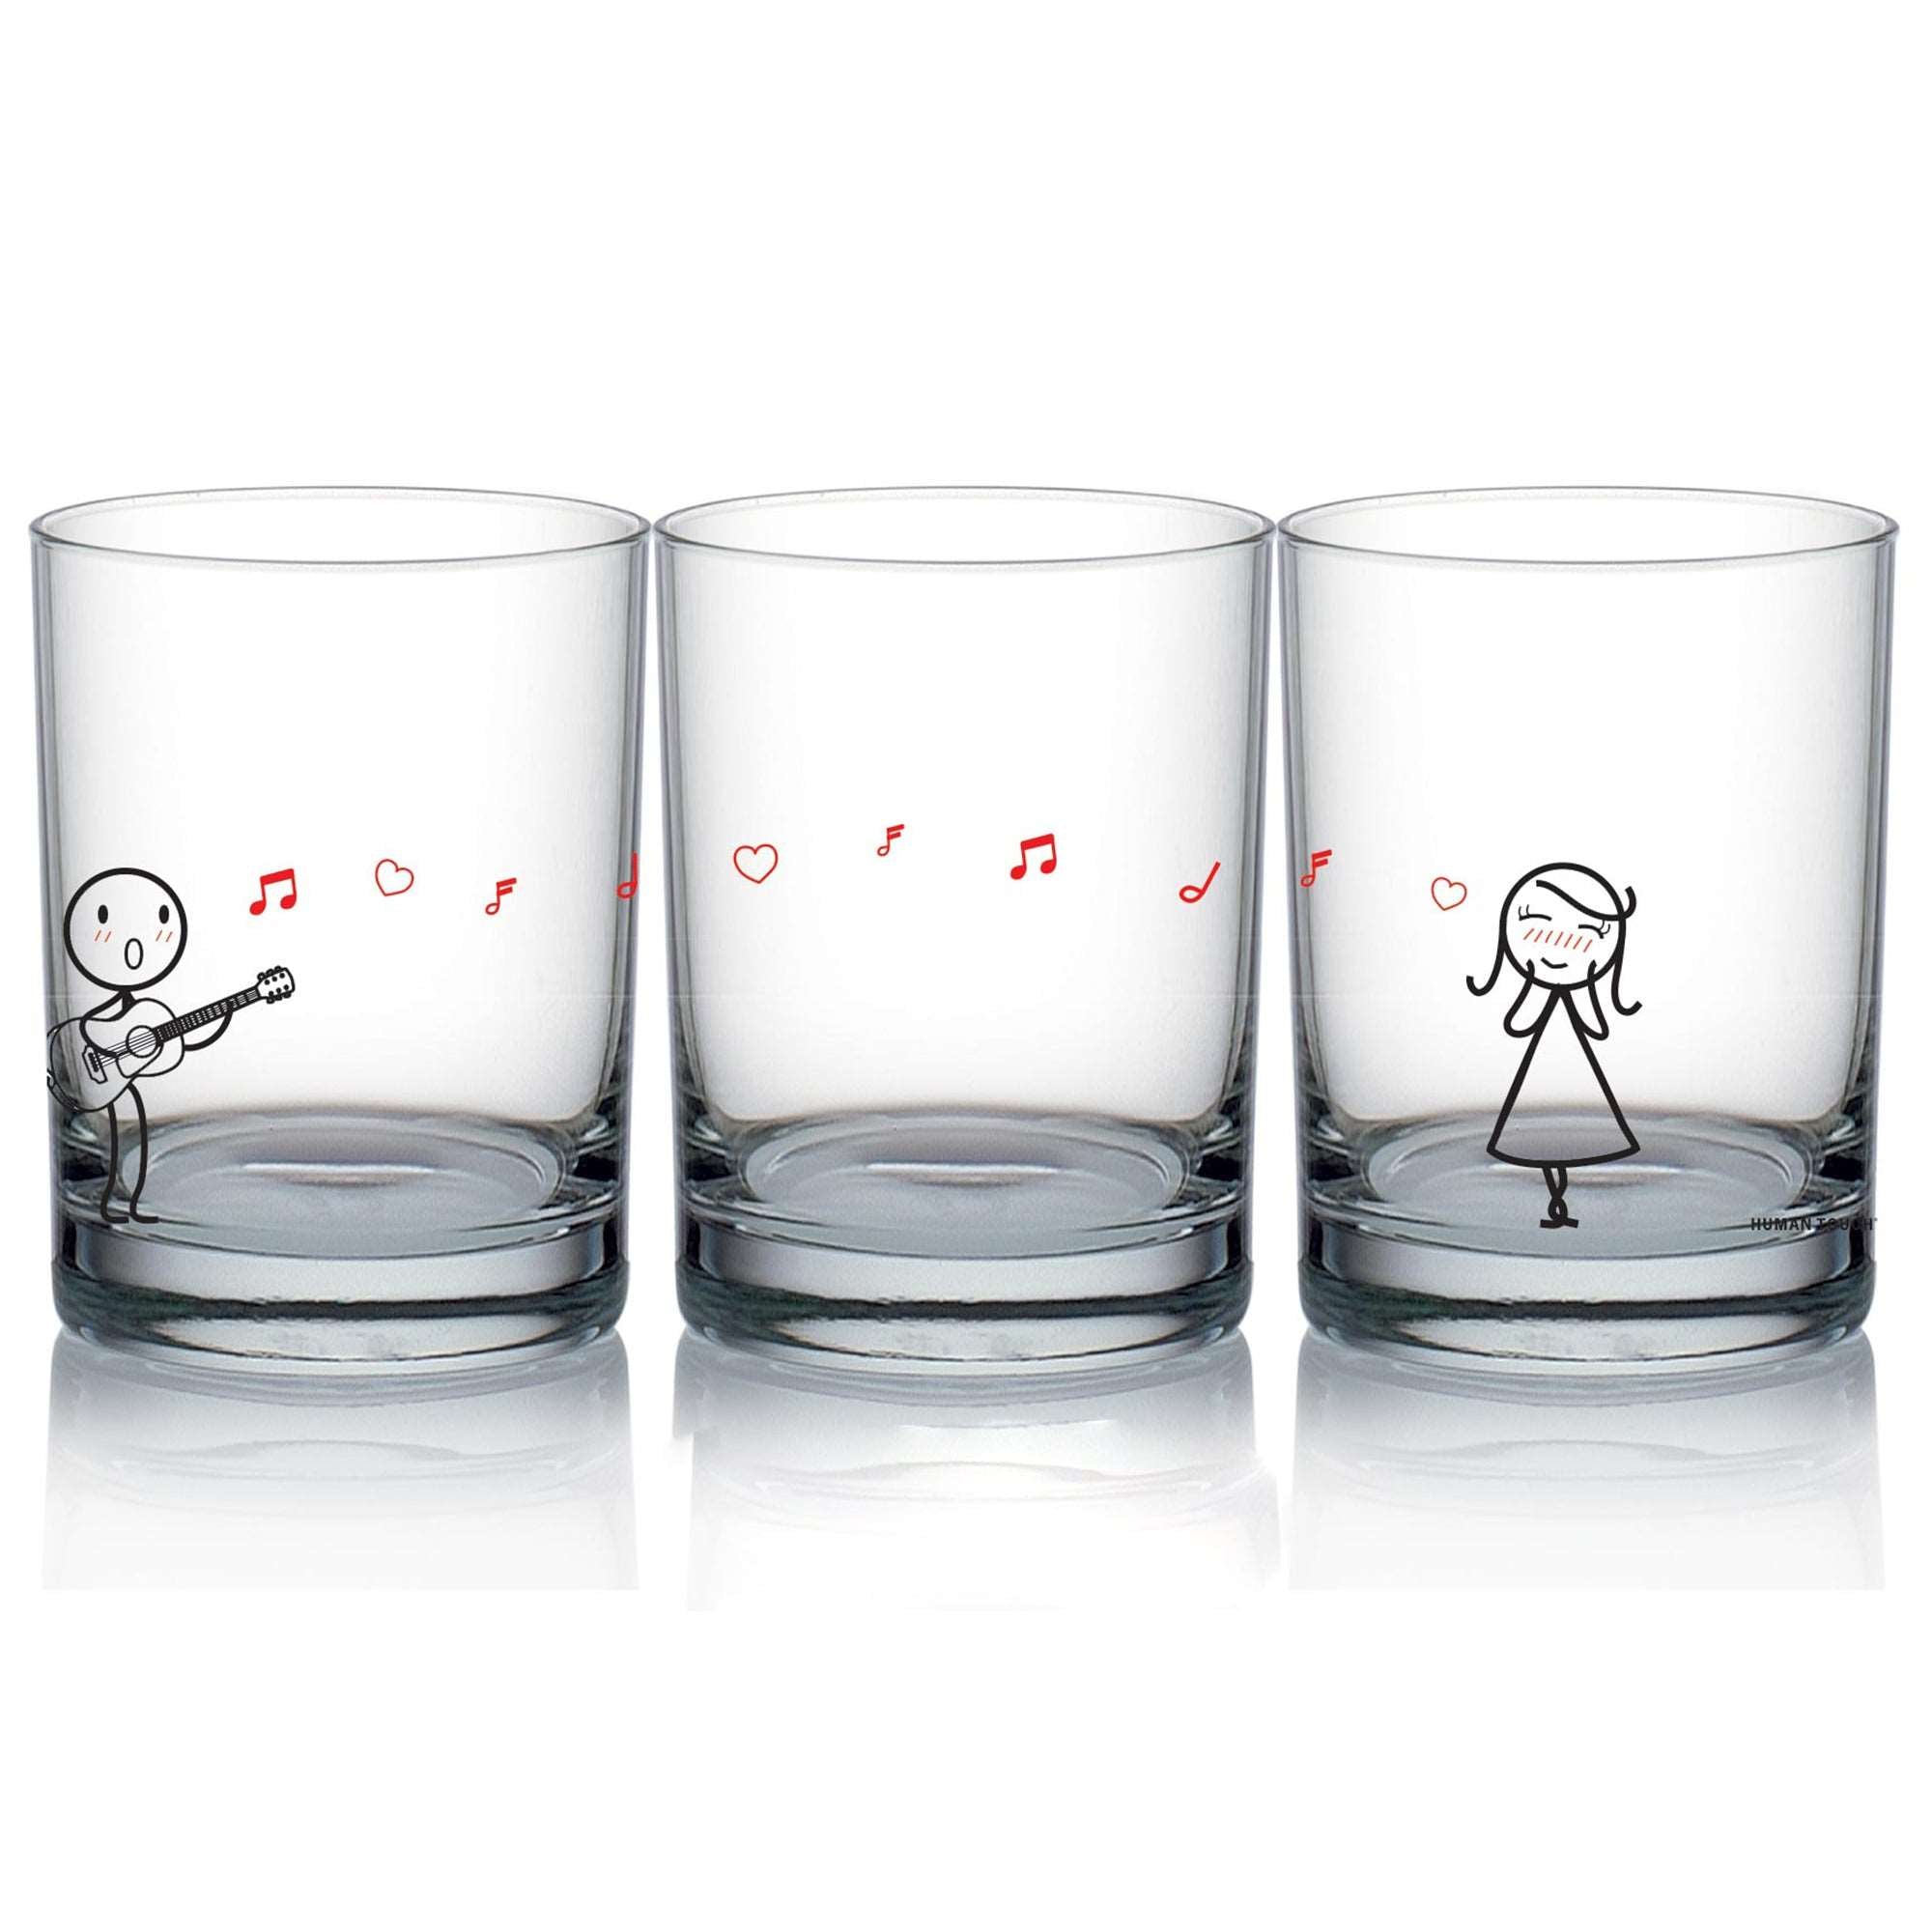 Personalized set of creatively designed glasses, perfect for couples, anniversaries, and thoughtful gifts for him or her.